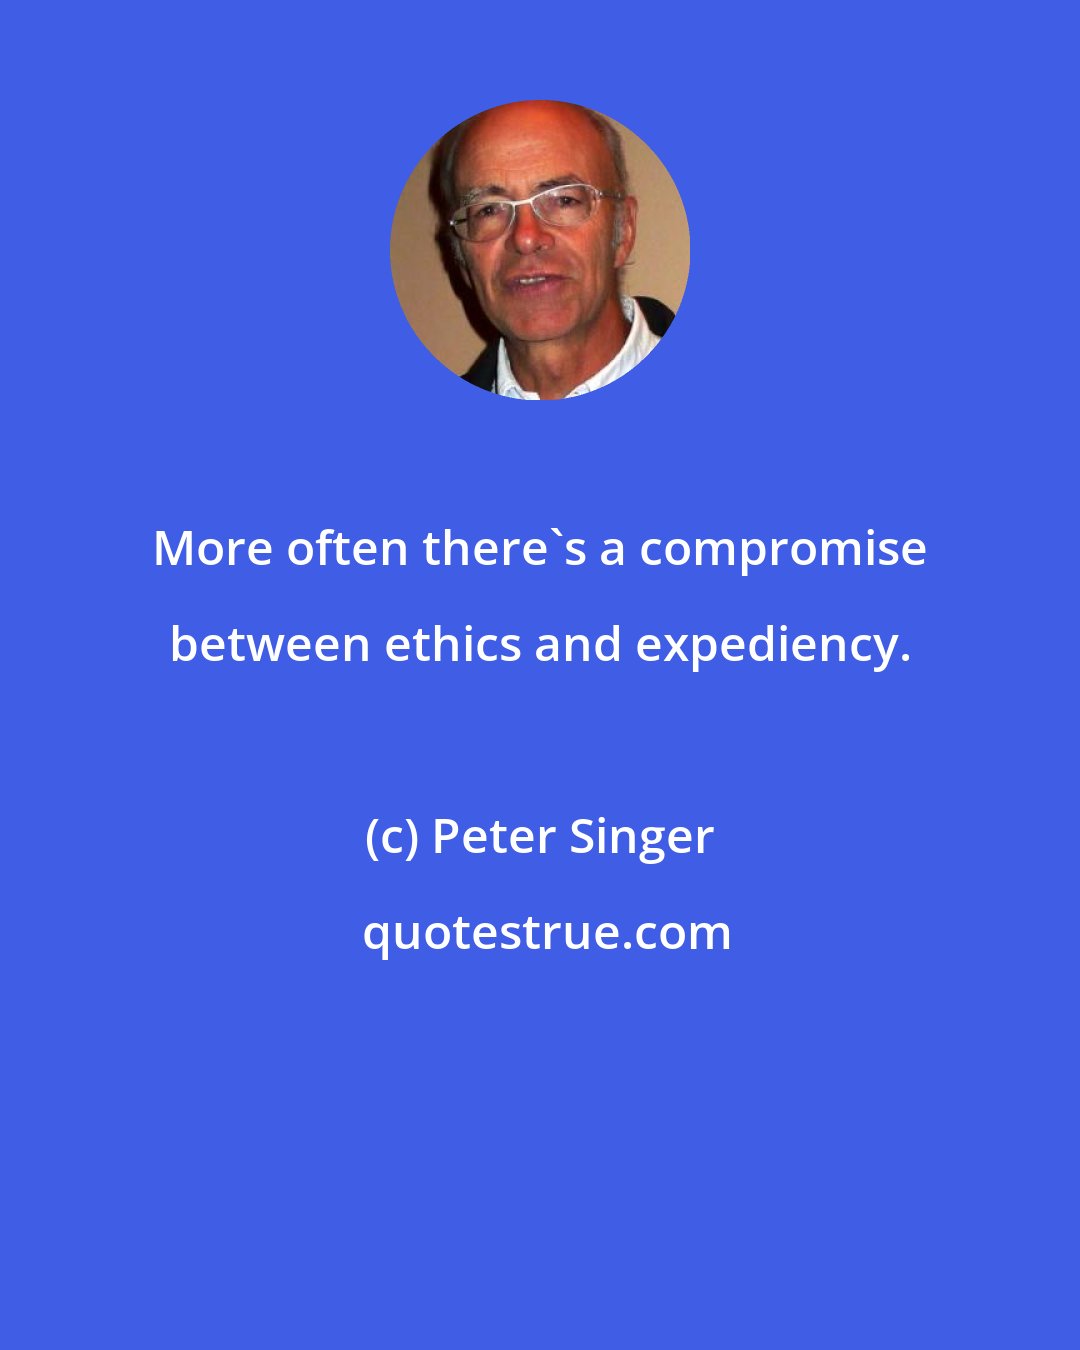 Peter Singer: More often there's a compromise between ethics and expediency.